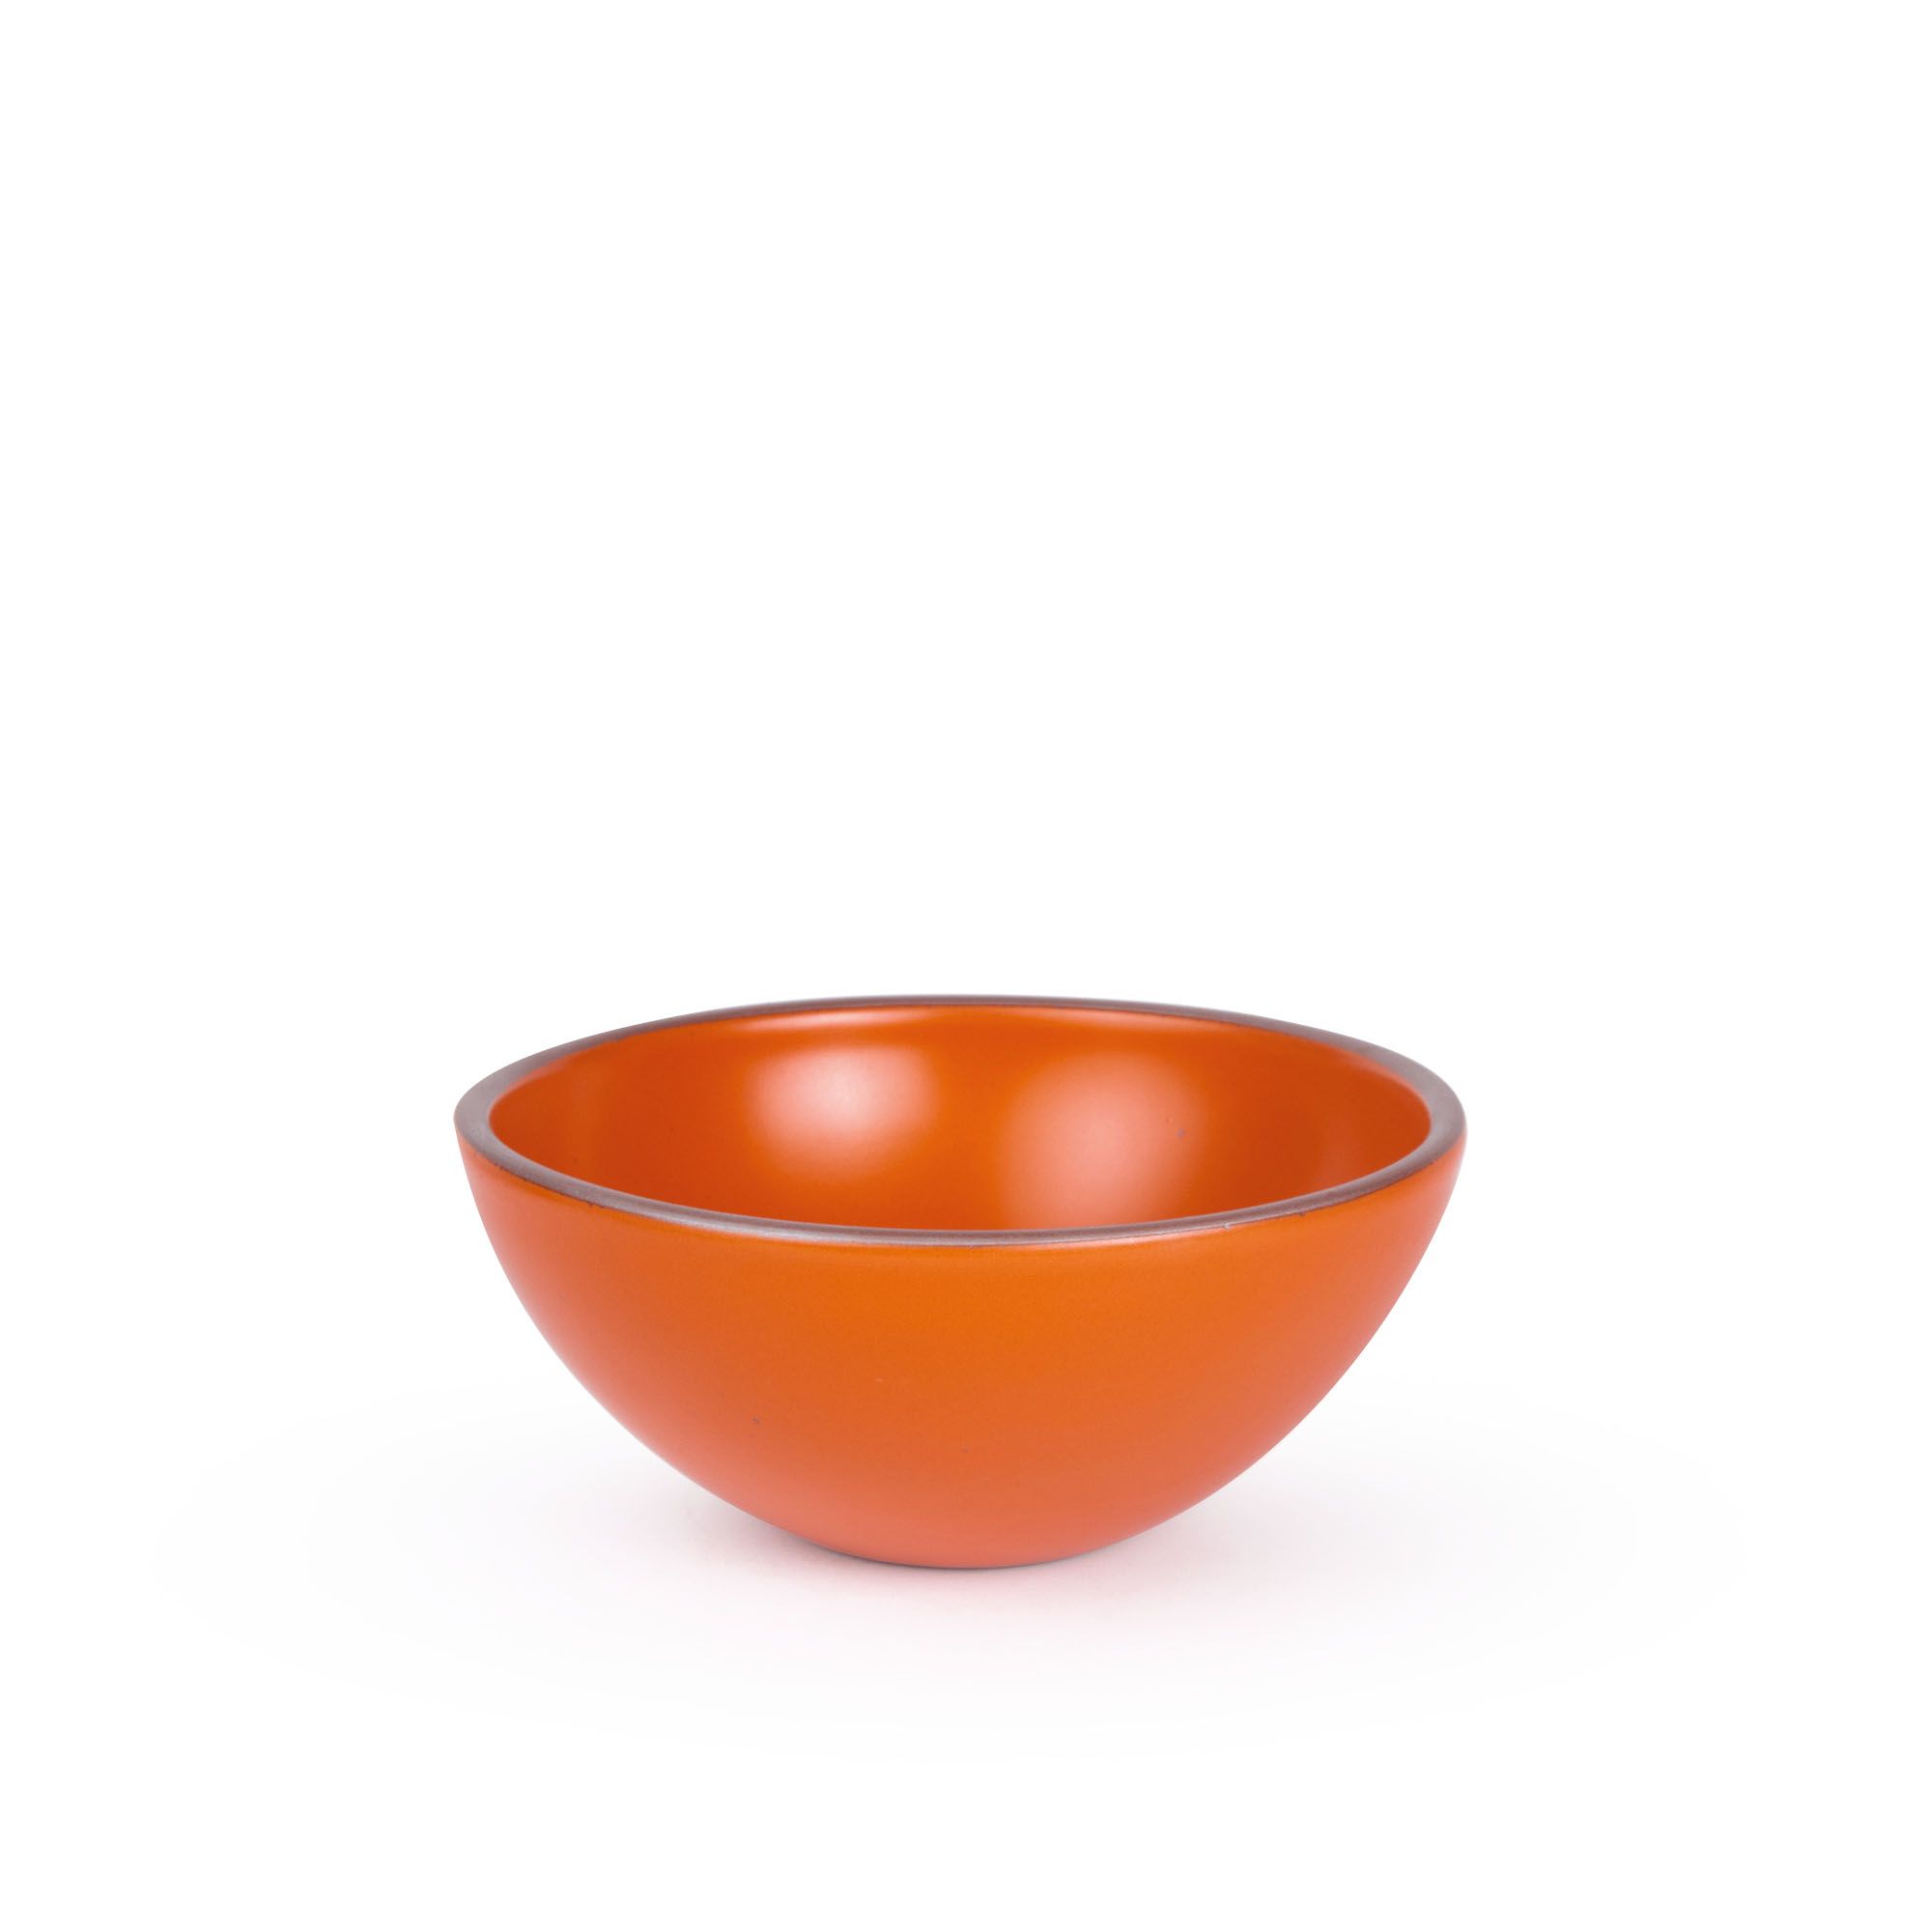 A medium rounded ceramic bowl in a bold orange color featuring iron speckles and an unglazed rim